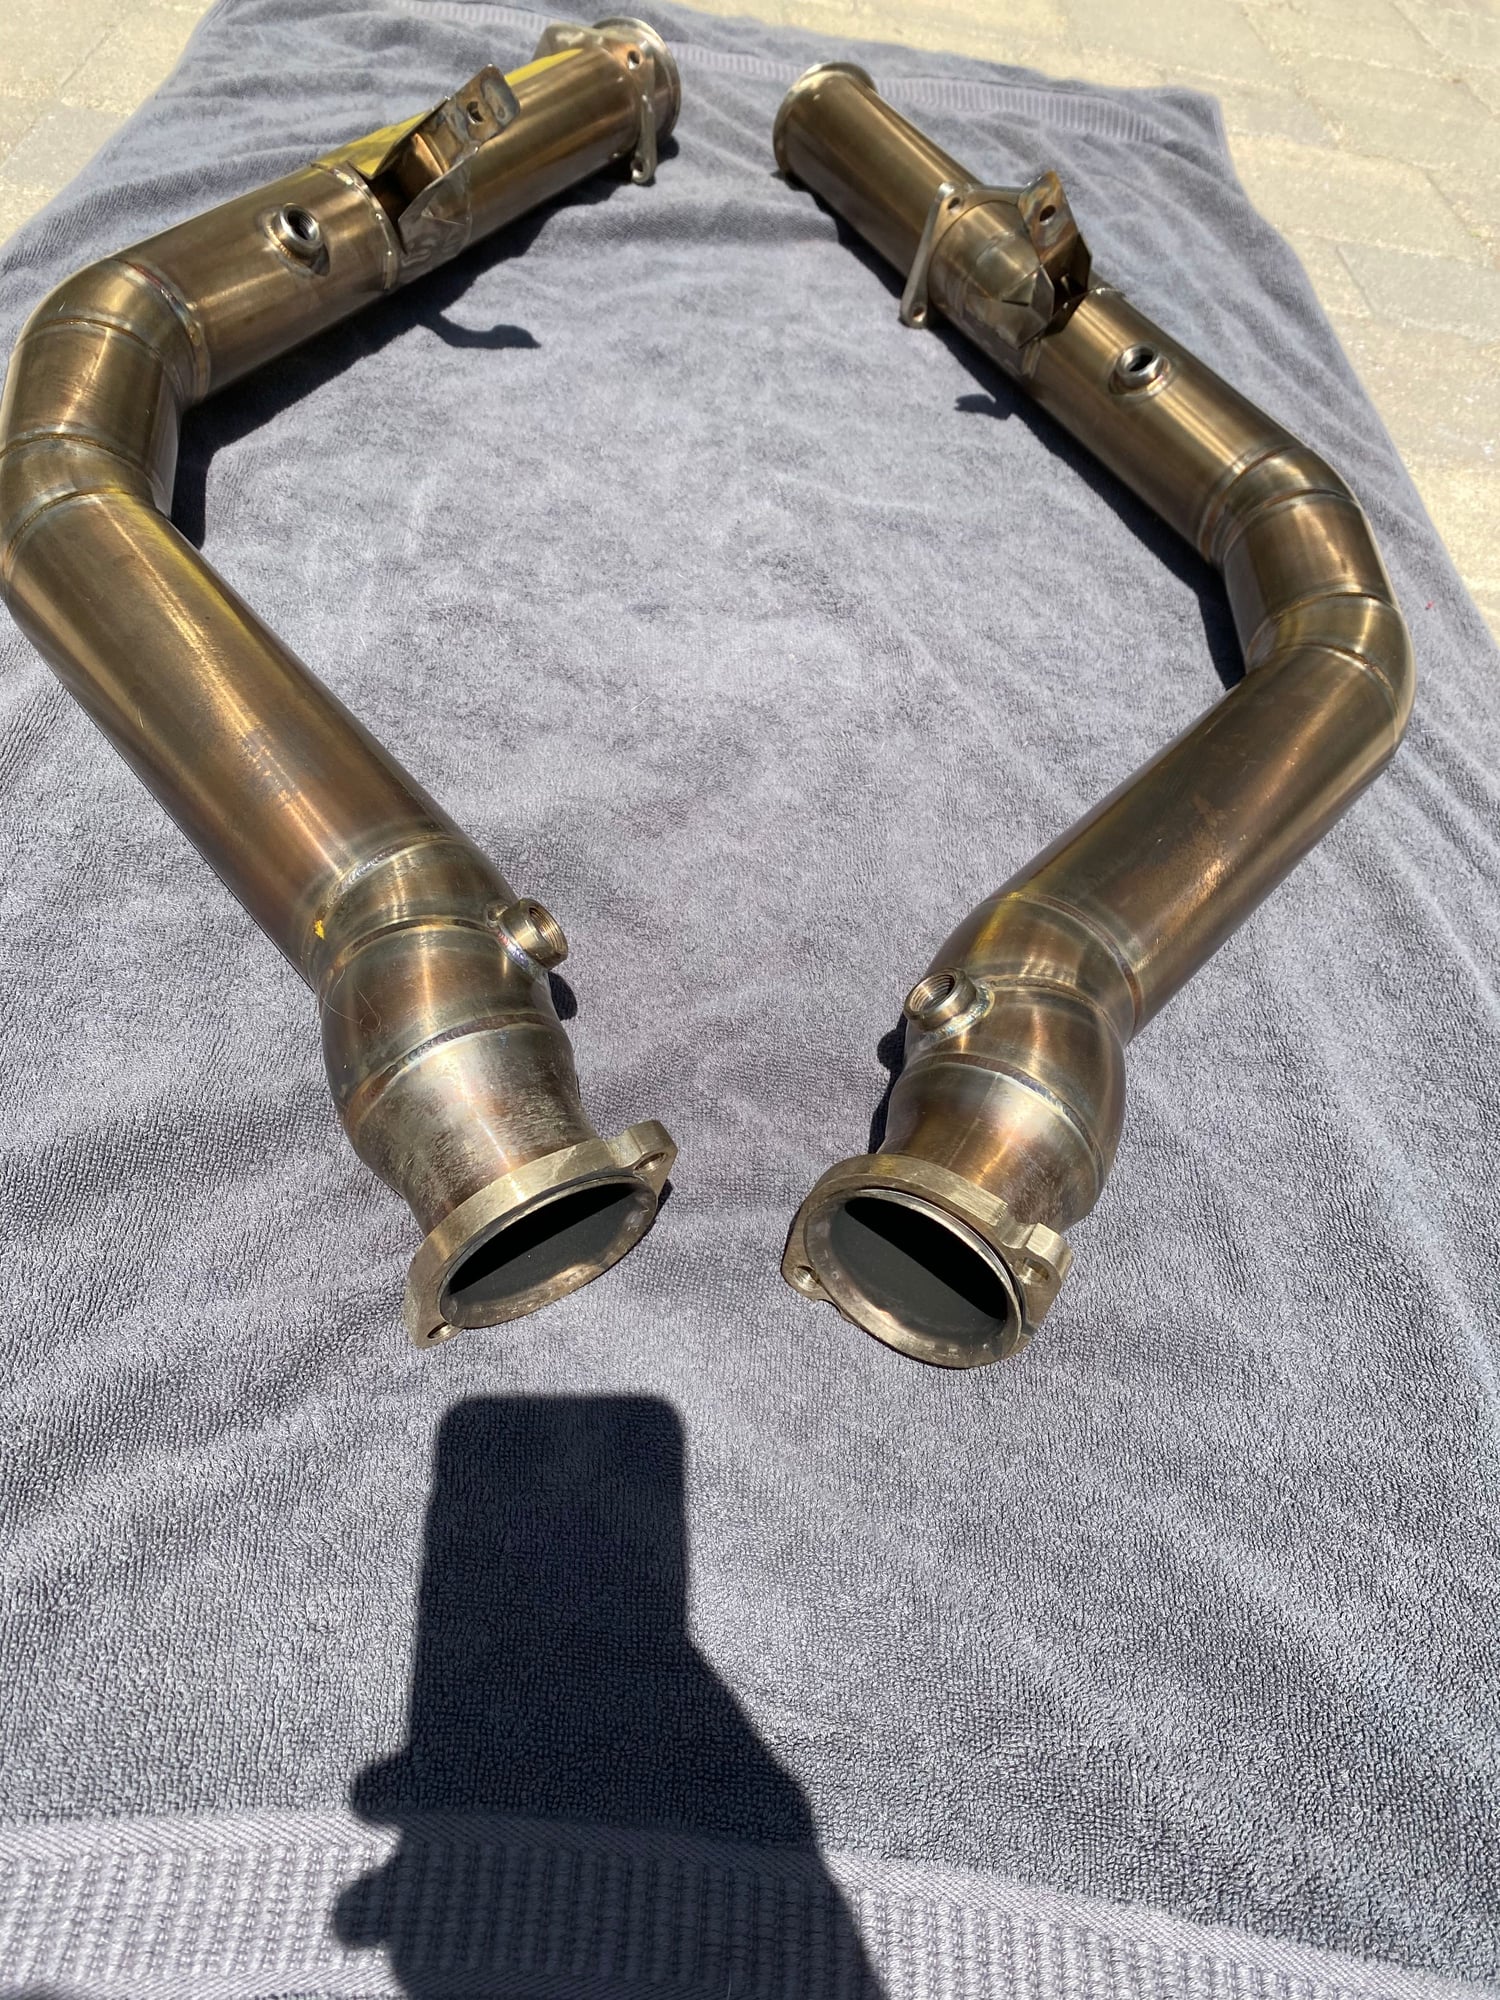 Engine - Exhaust - G63 Catless Downpipes and Valved Exhaust M157 FS - Southern California - Used - 2013 to 2016 Mercedes-Benz G63 AMG - Orange, CA 92865, United States